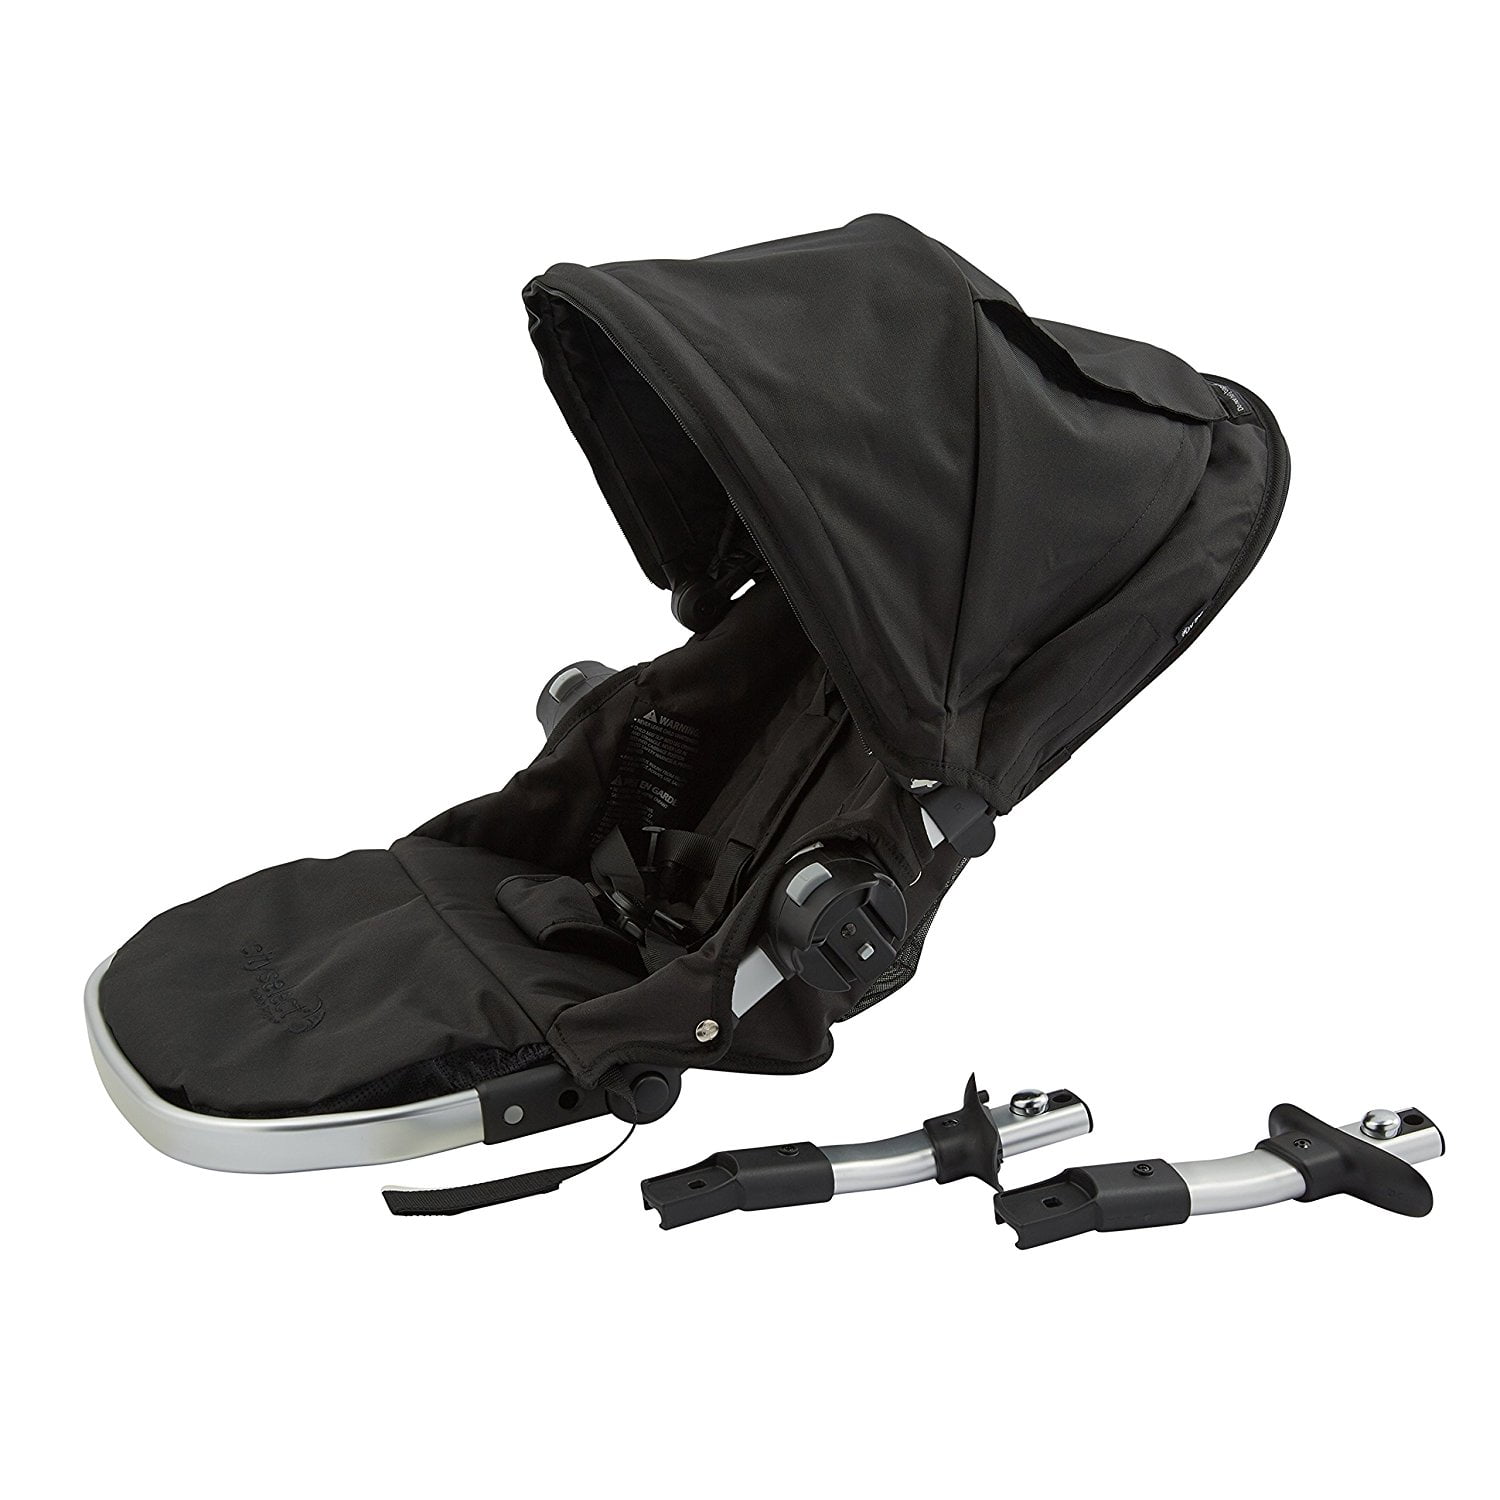 baby jogger city select onyx second seat